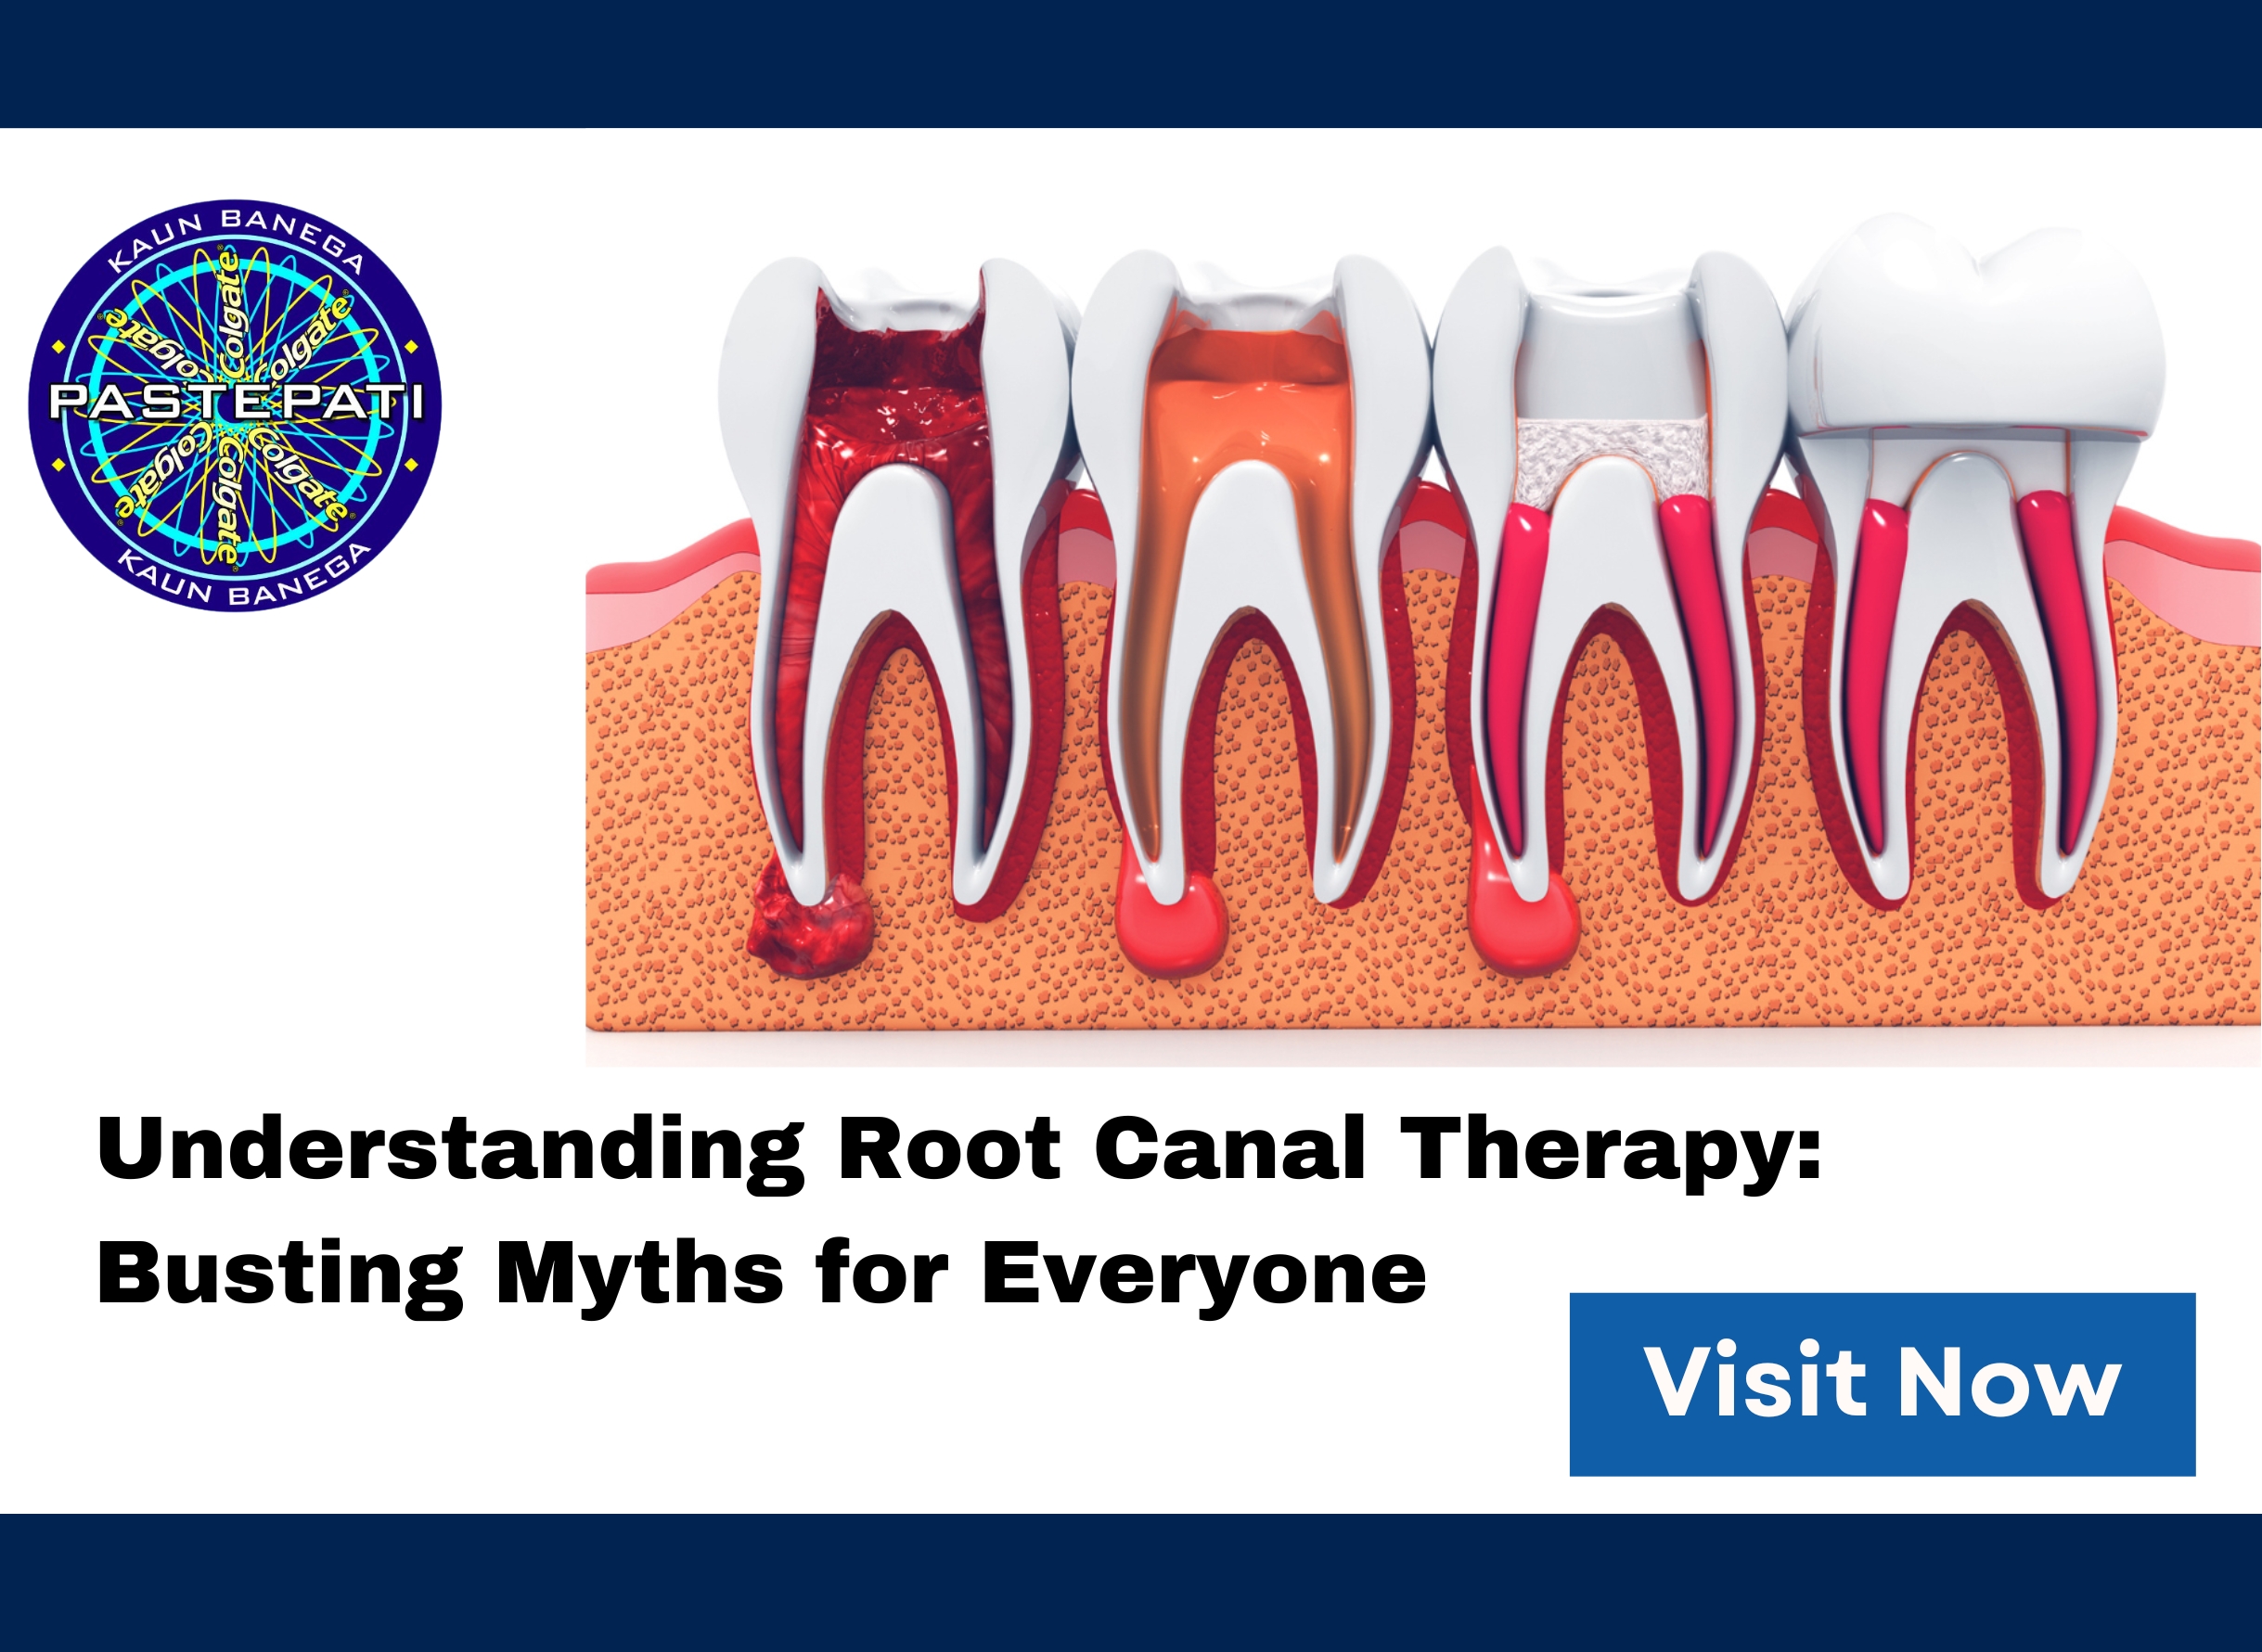 Understanding Root Canal Therapy: Busting Myths for Everyone